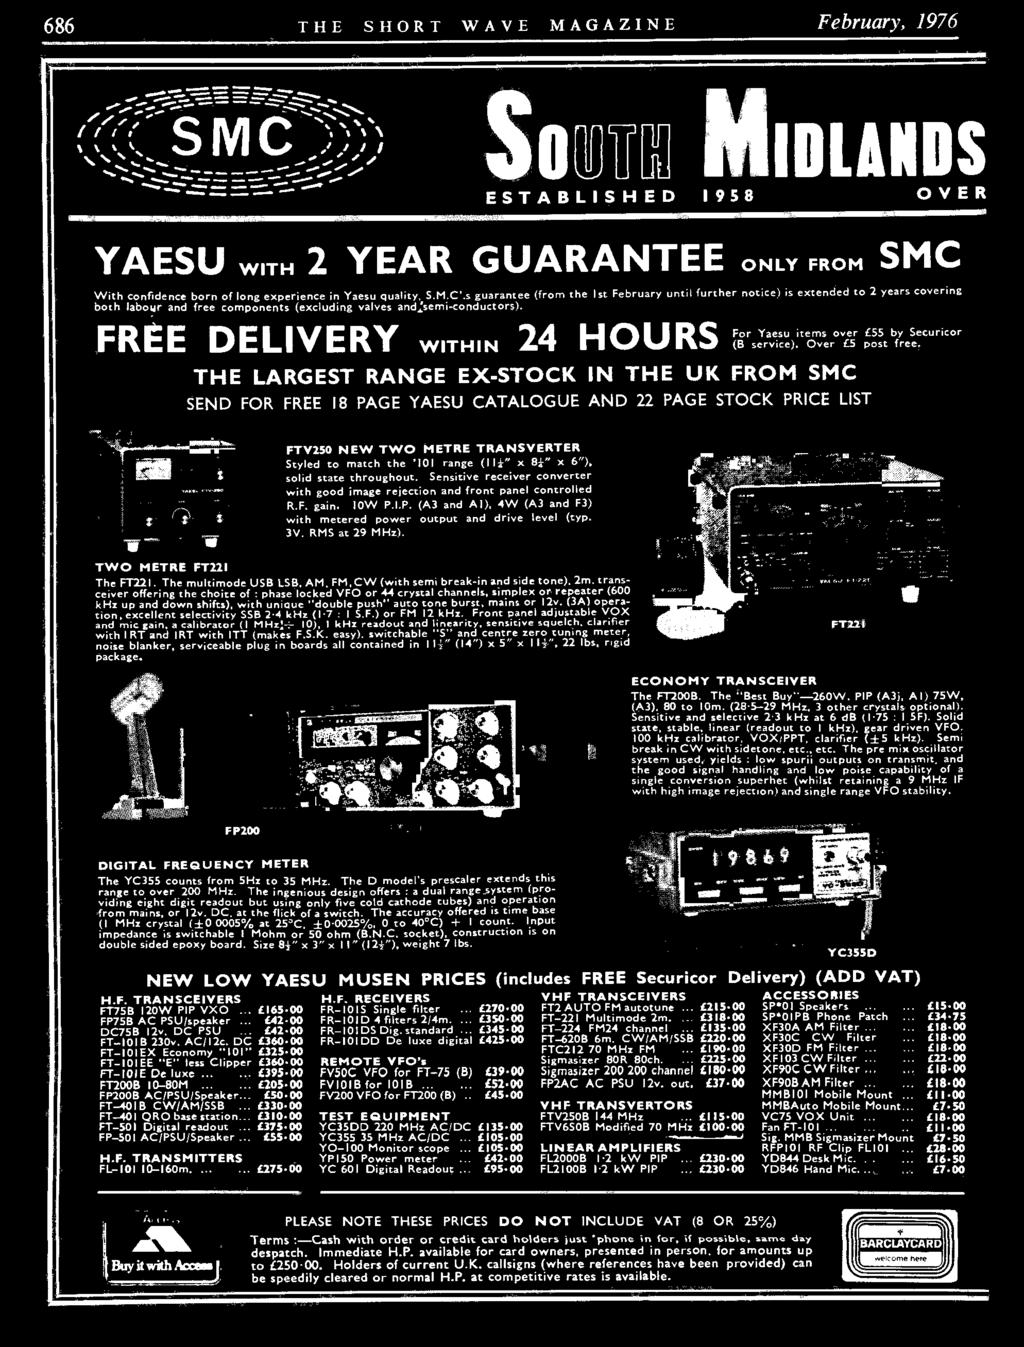 For Yaesu items over E55 by Securicor FREE DELIVERY WITHIN 24 HURS (B service). ver E5 post free.